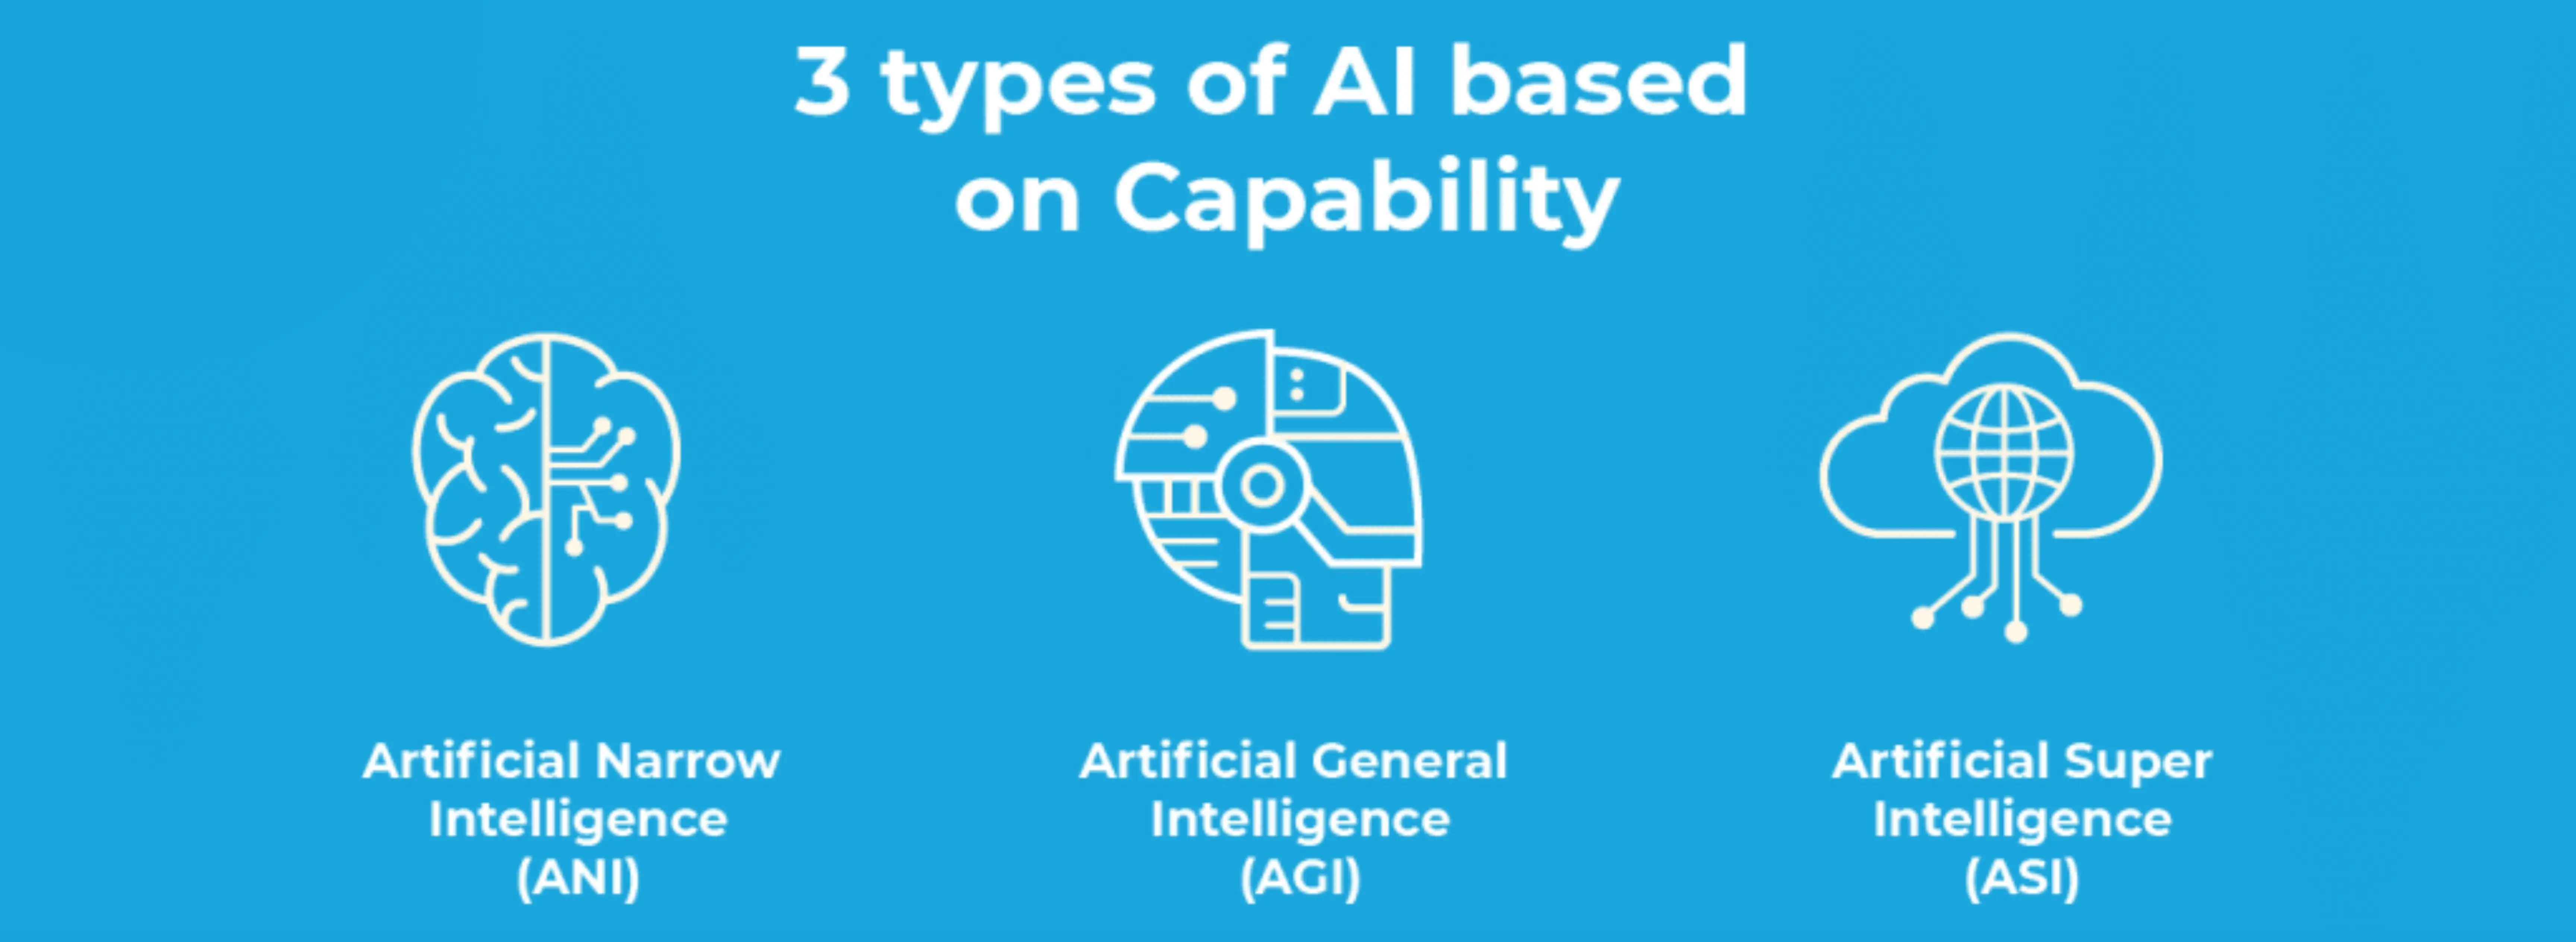 Image with texts that list out the 3 types of AI